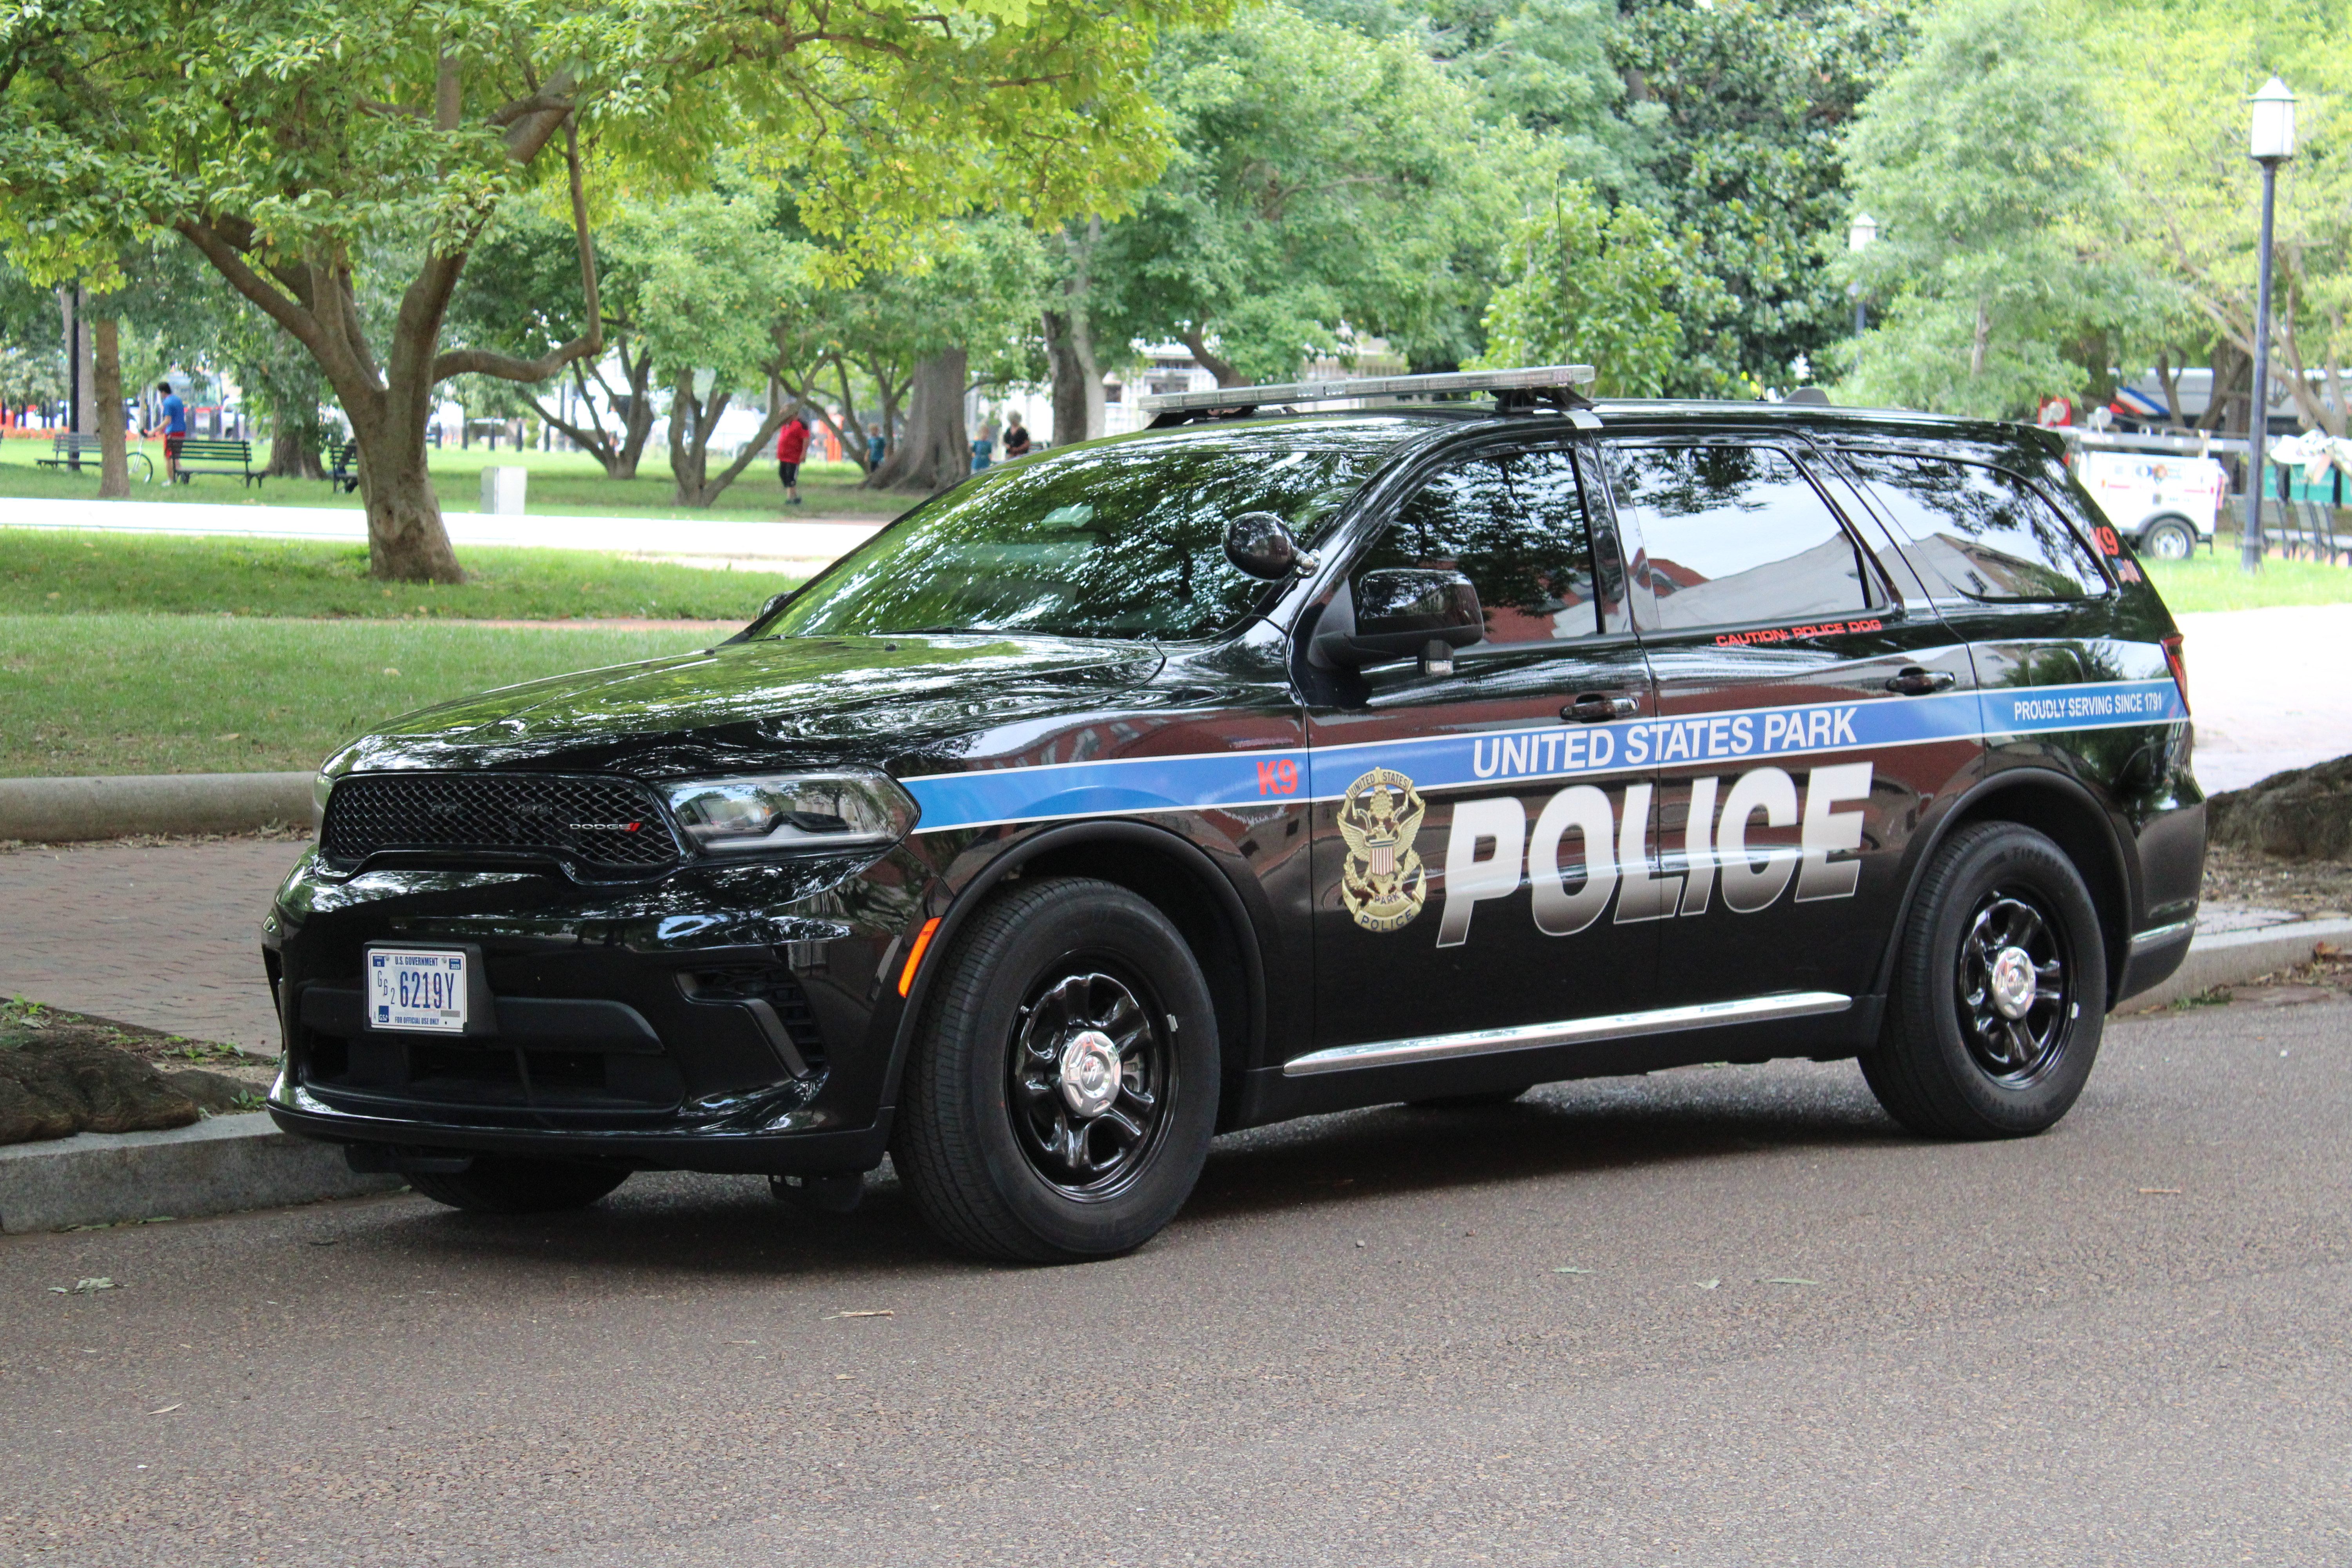 A photo  of United States Park Police
            Cruiser 6219, a 2021-2022 Dodge Durango             taken by @riemergencyvehicles